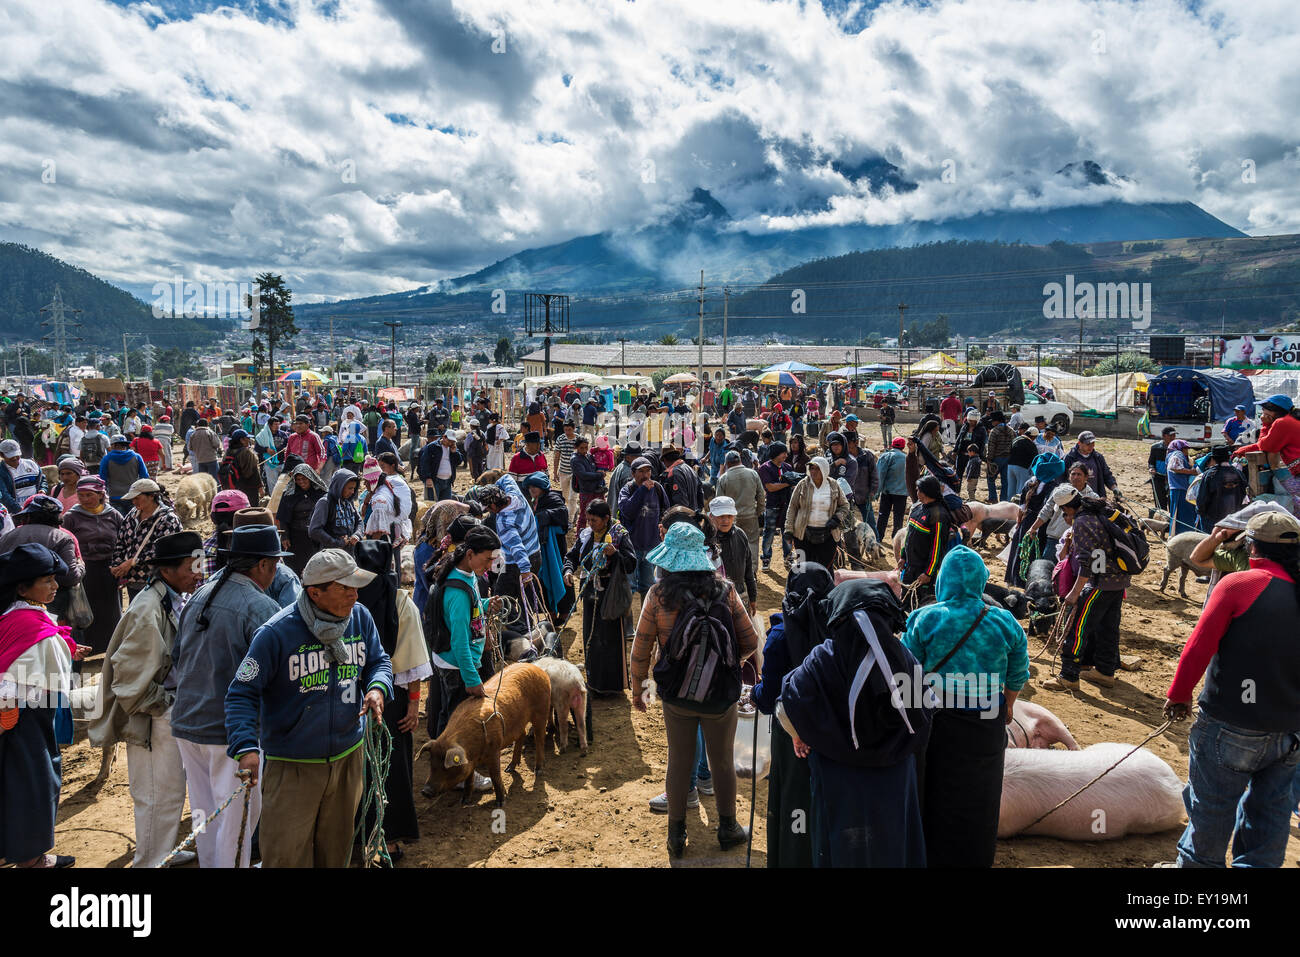 Pigs and other animals are bought and sold at livestock market. Otavalo, Ecuador. Stock Photo